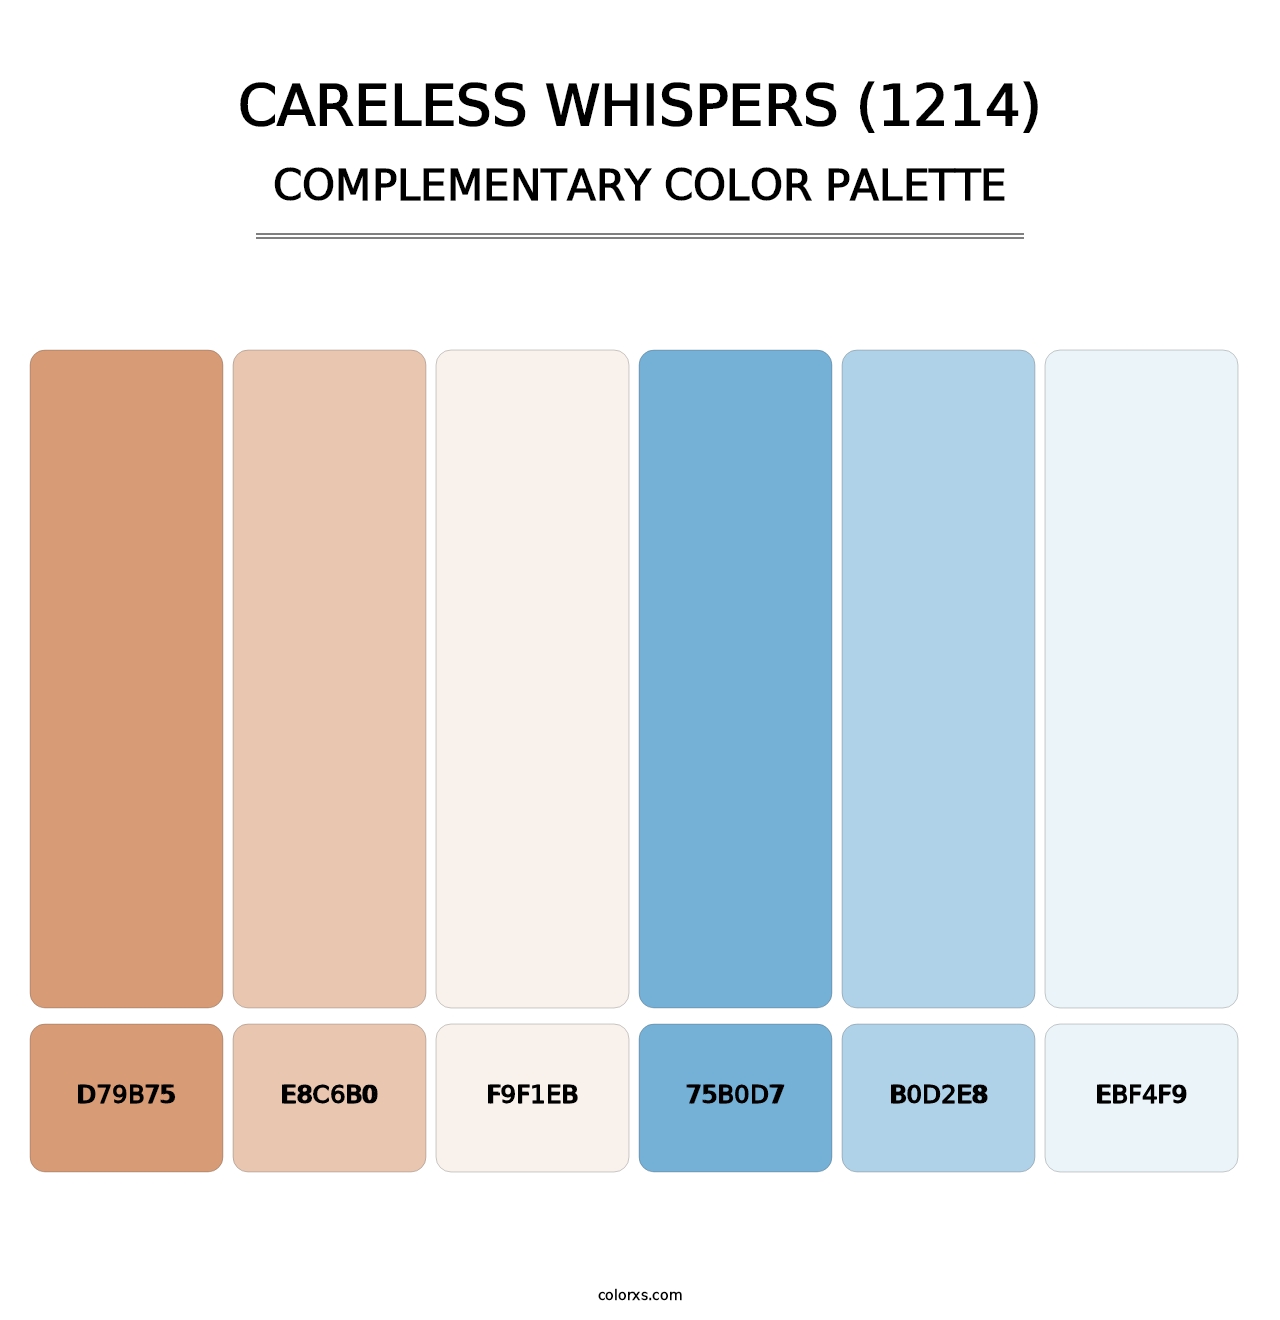 Careless Whispers (1214) - Complementary Color Palette